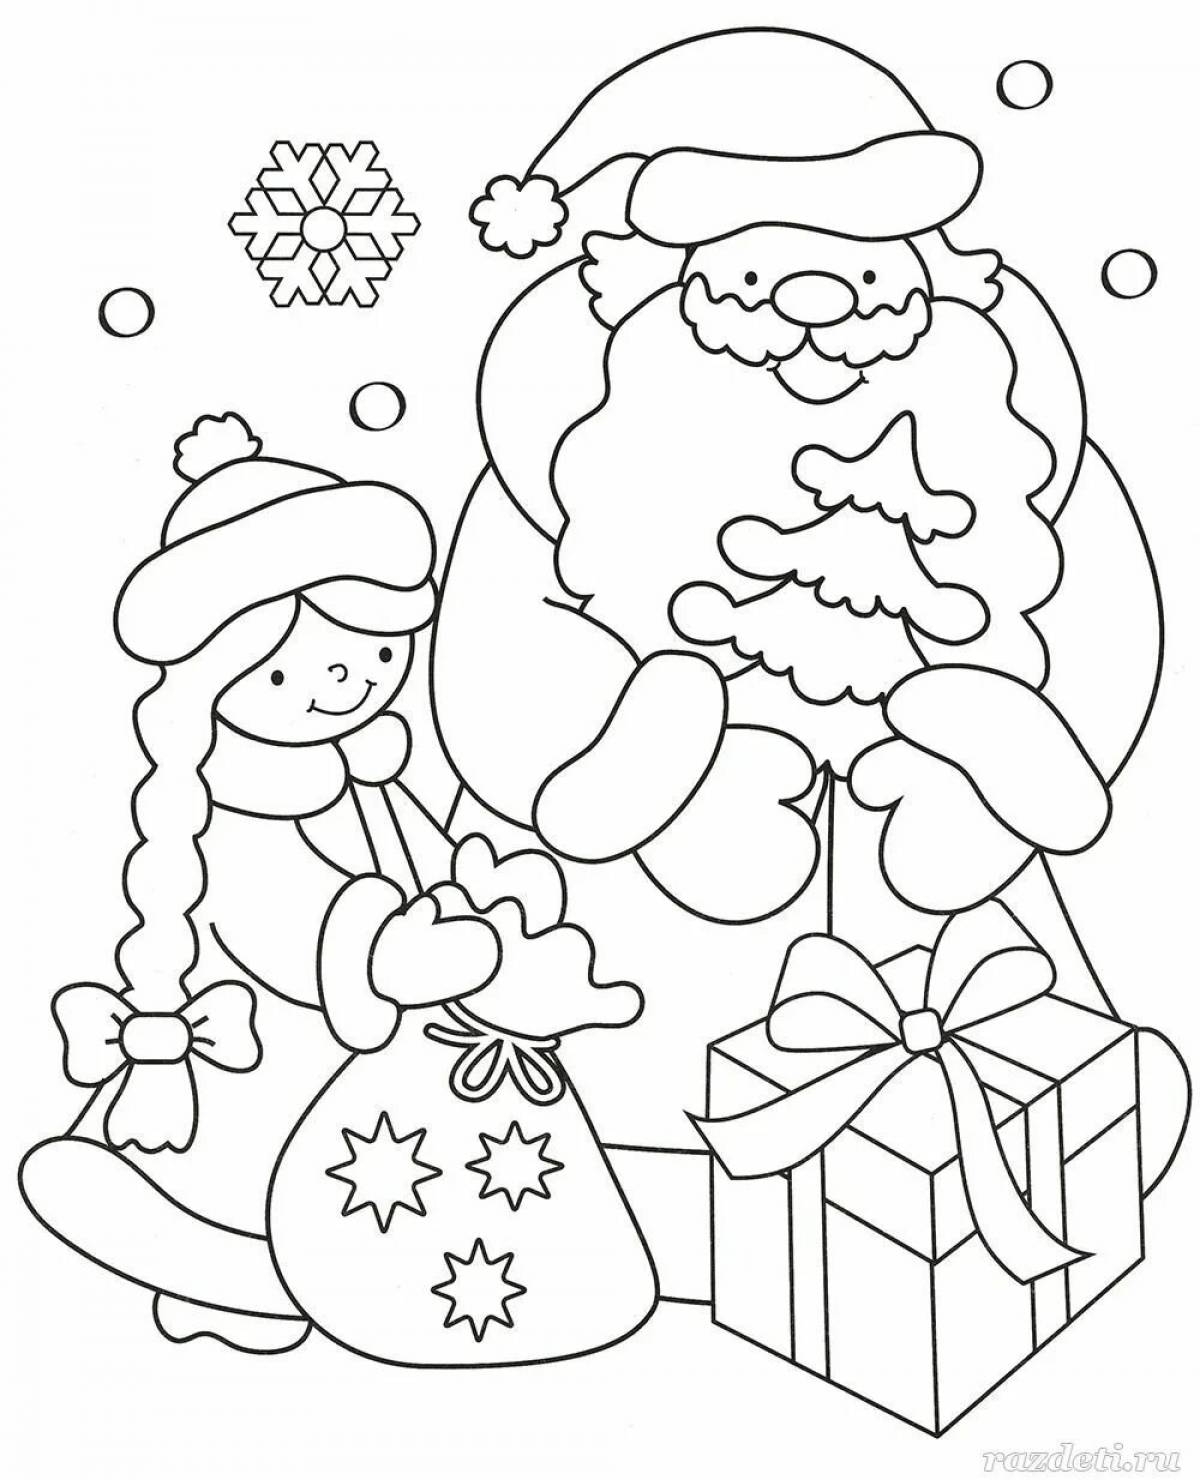 Coloring page adorable santa claus for girls